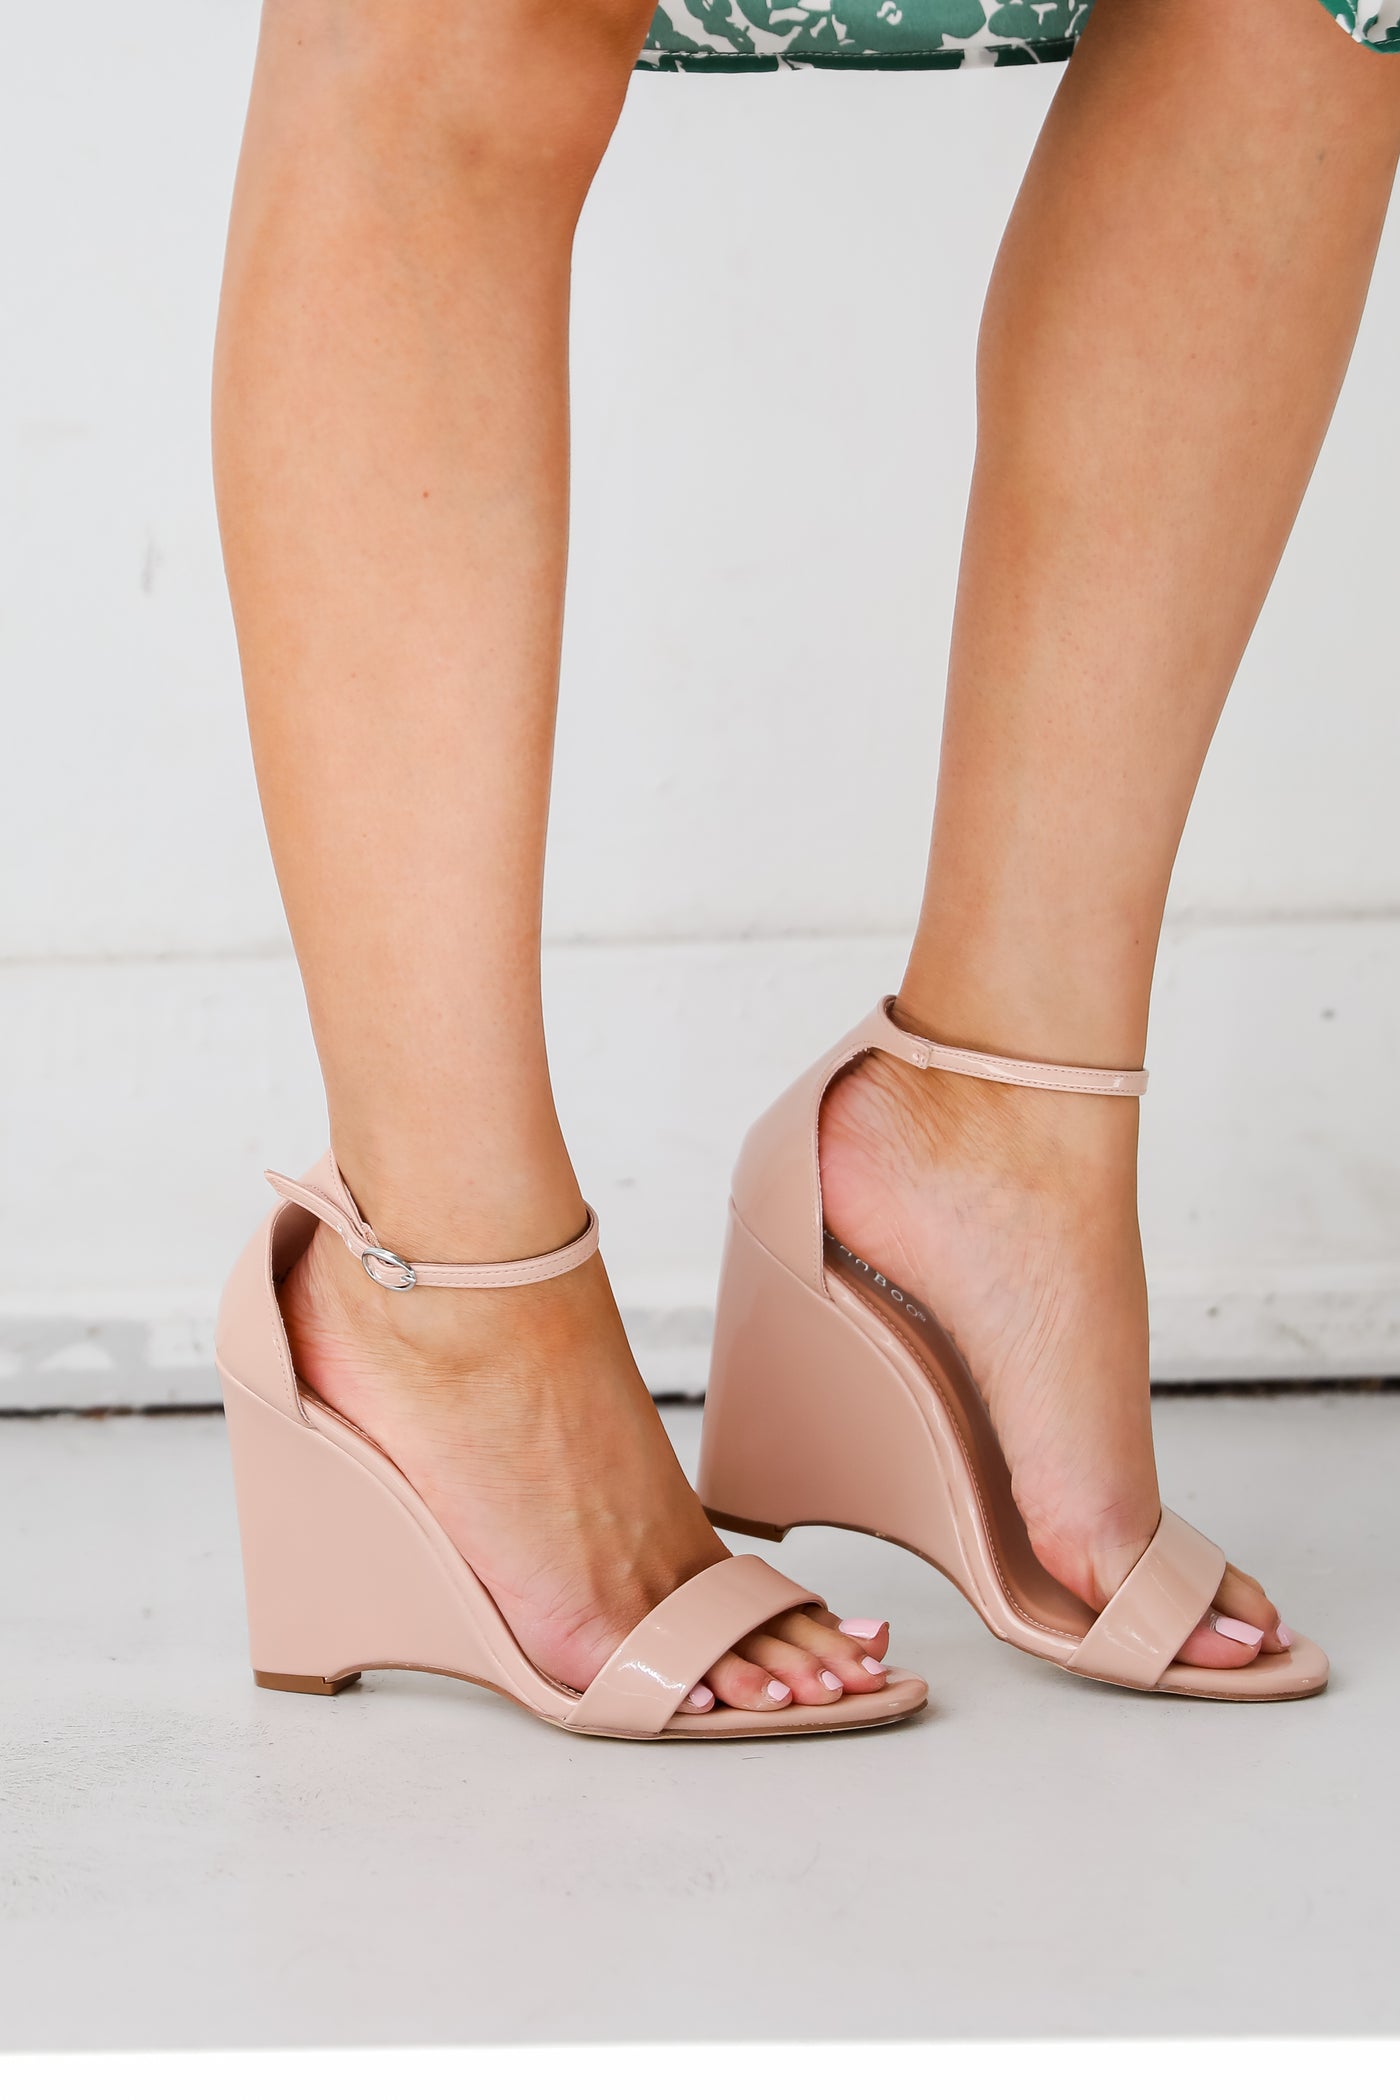 Part Of The Plan Nude Ankle Strap Wedgeswomens heels